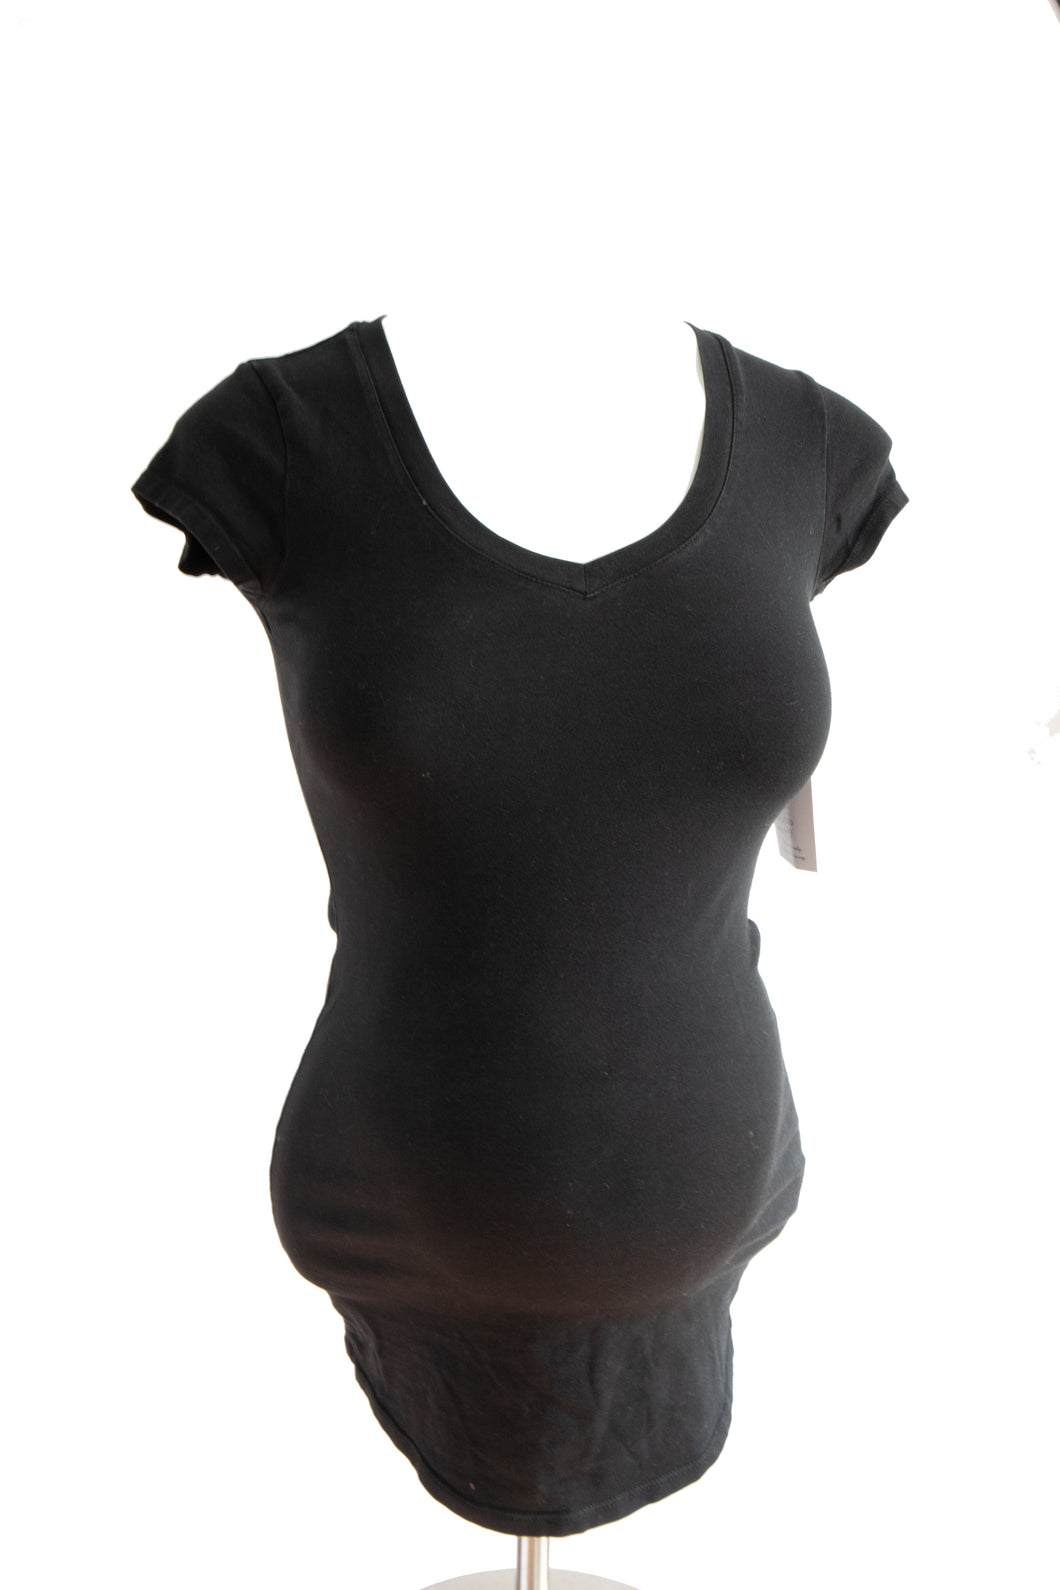 XS Thyme Maternity T-shirt in Black